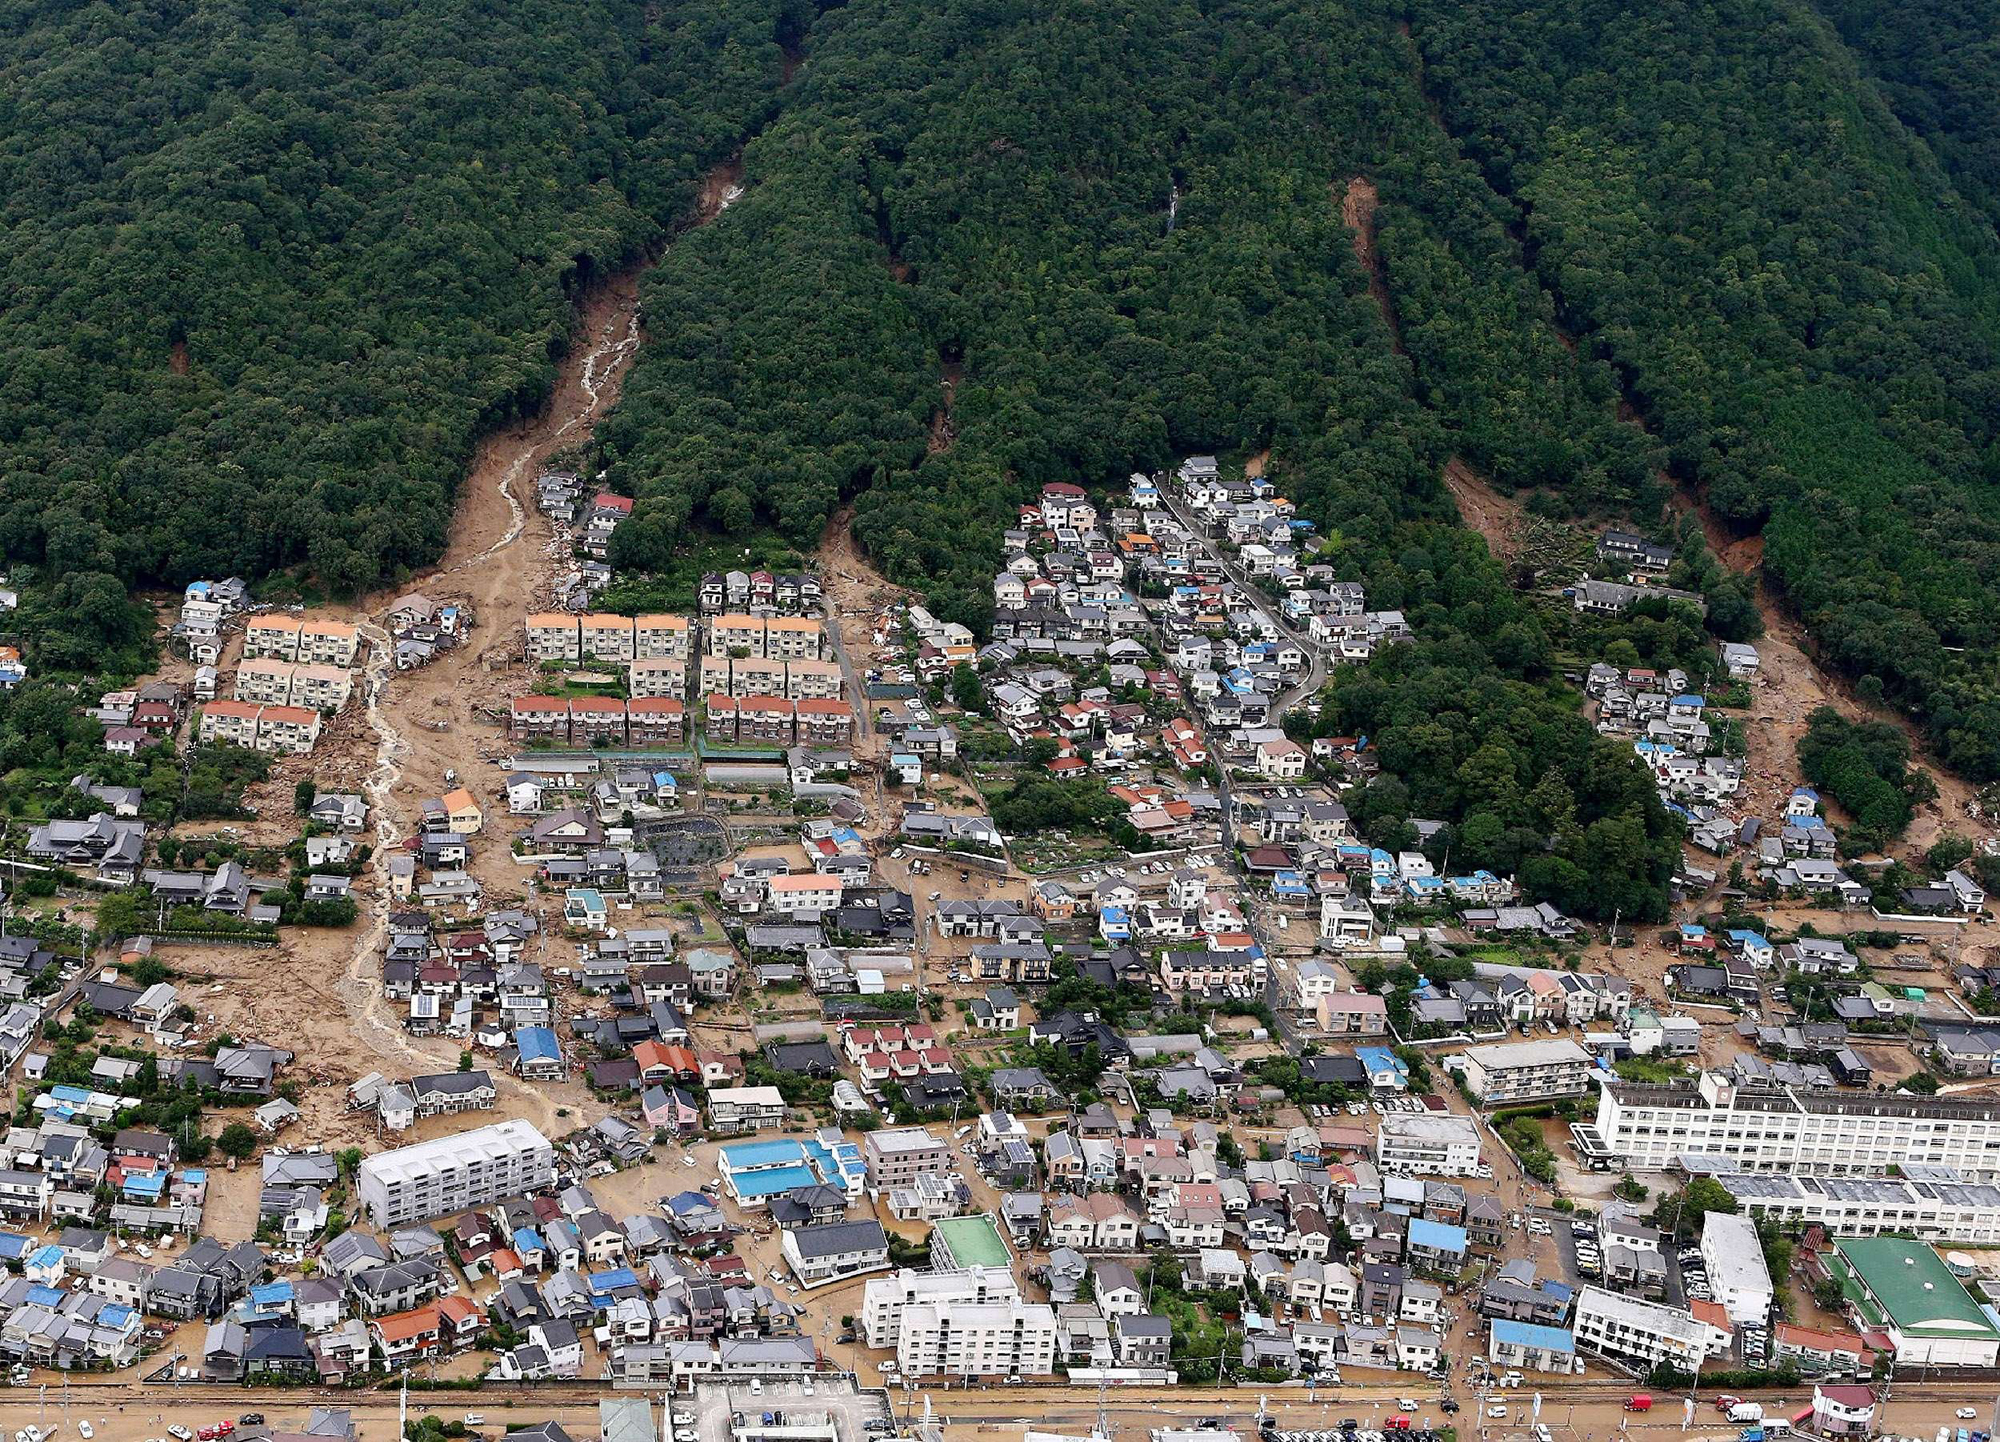 Damage caused by a landslide after heavy rains hit the city of Hiroshima, western Japan, on Aug. 20, 2014.